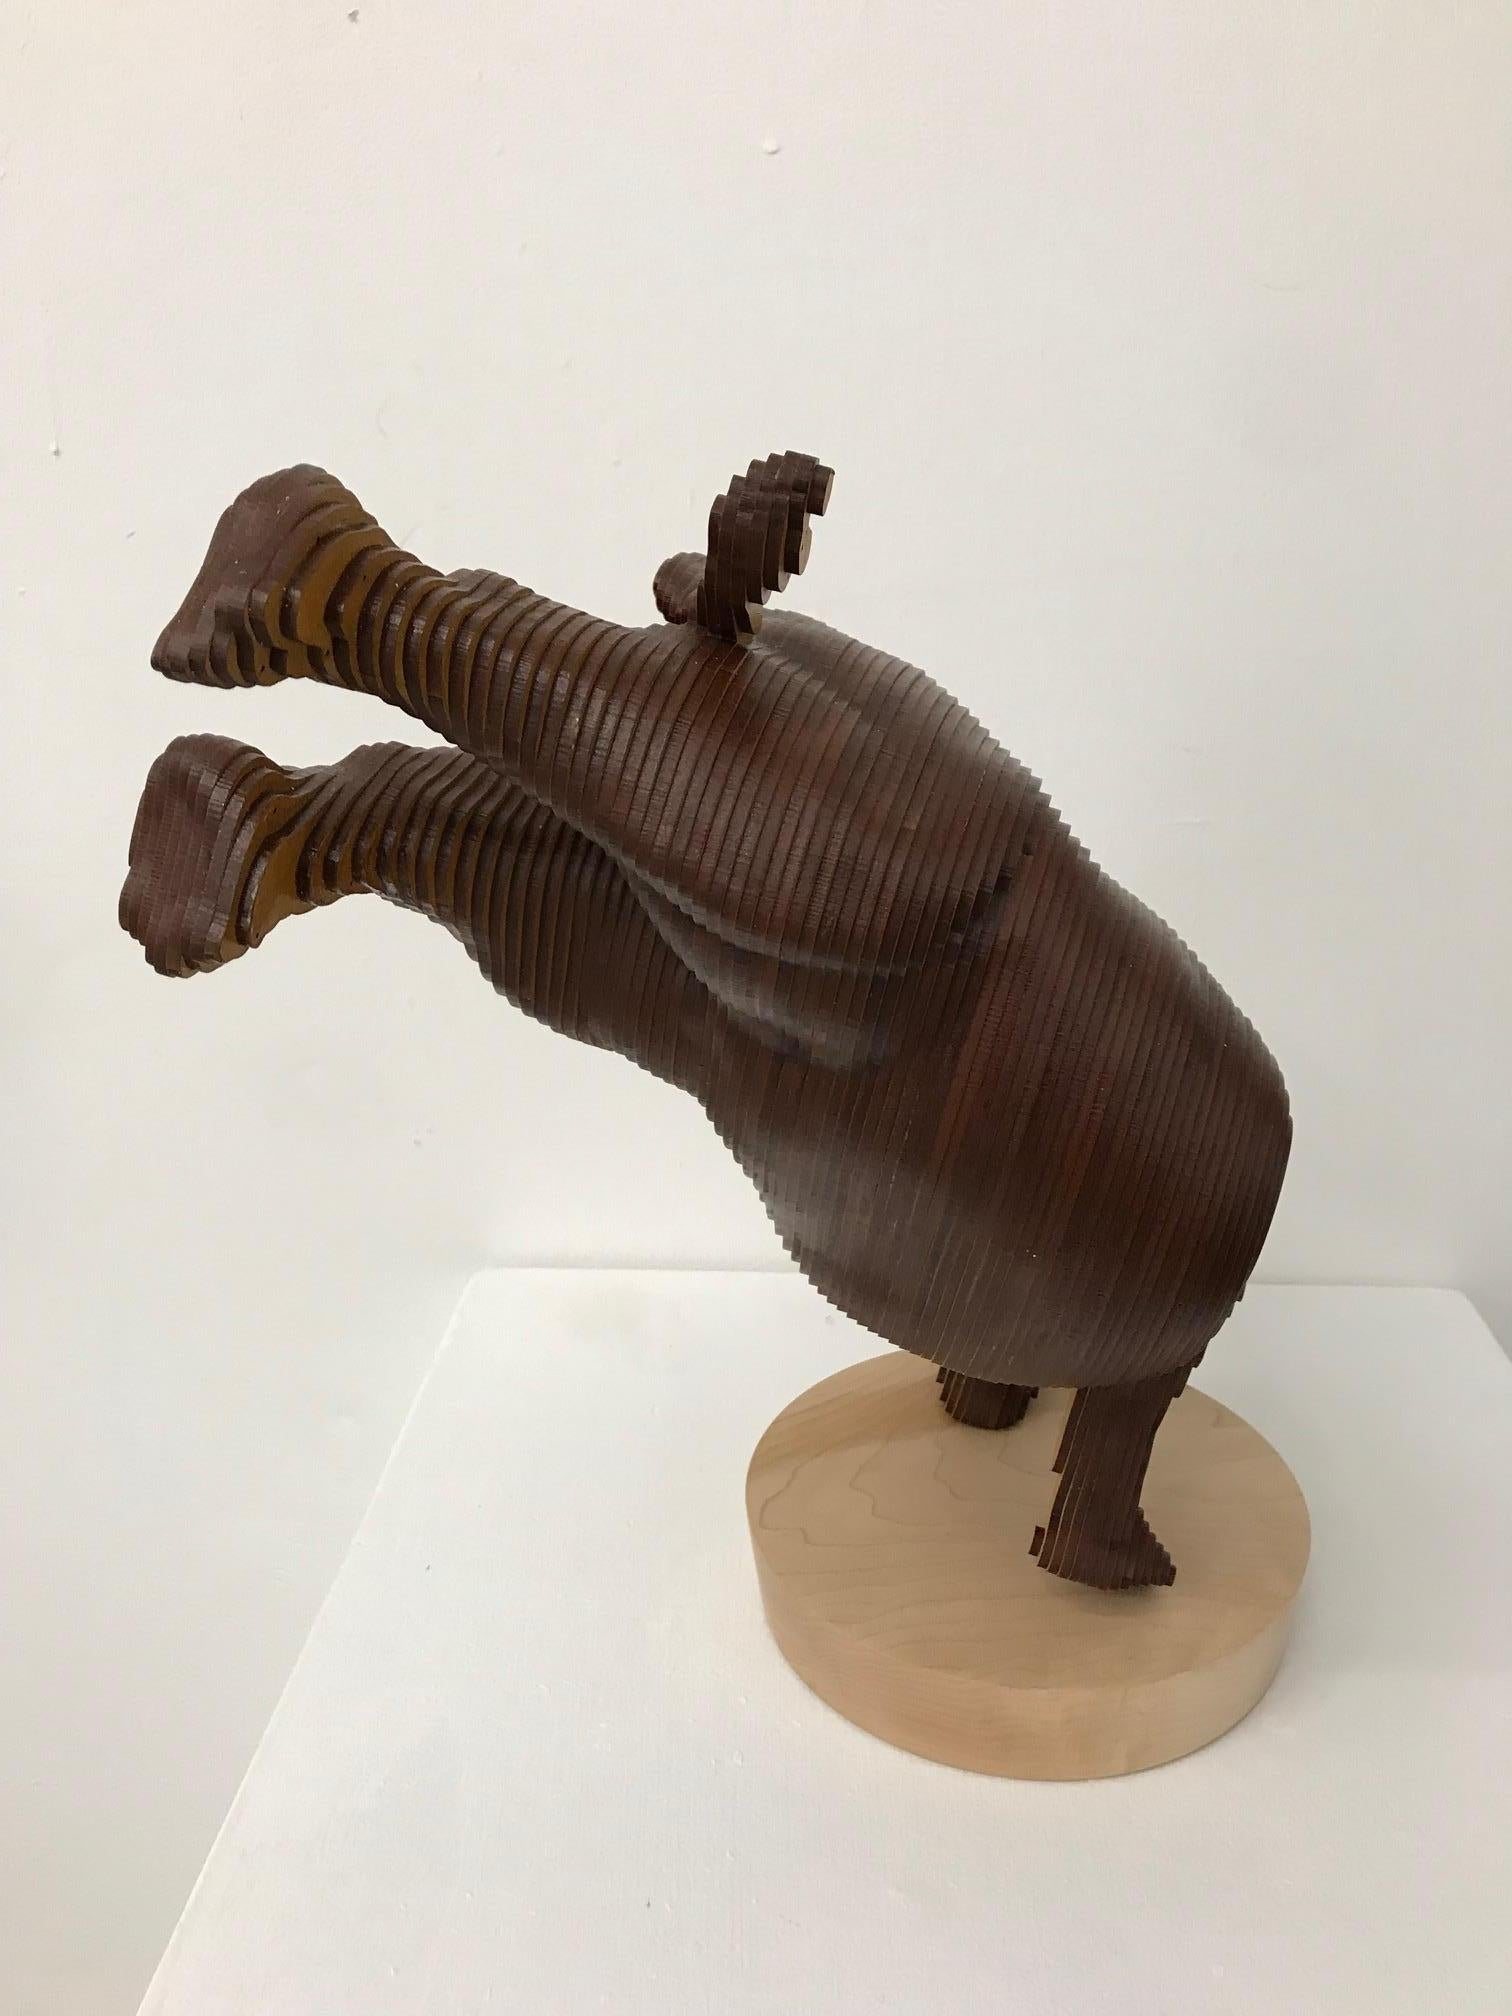 Ballerhino..Contemporary whimsical animal sculpture, wood slices, dancing rhino For Sale 4